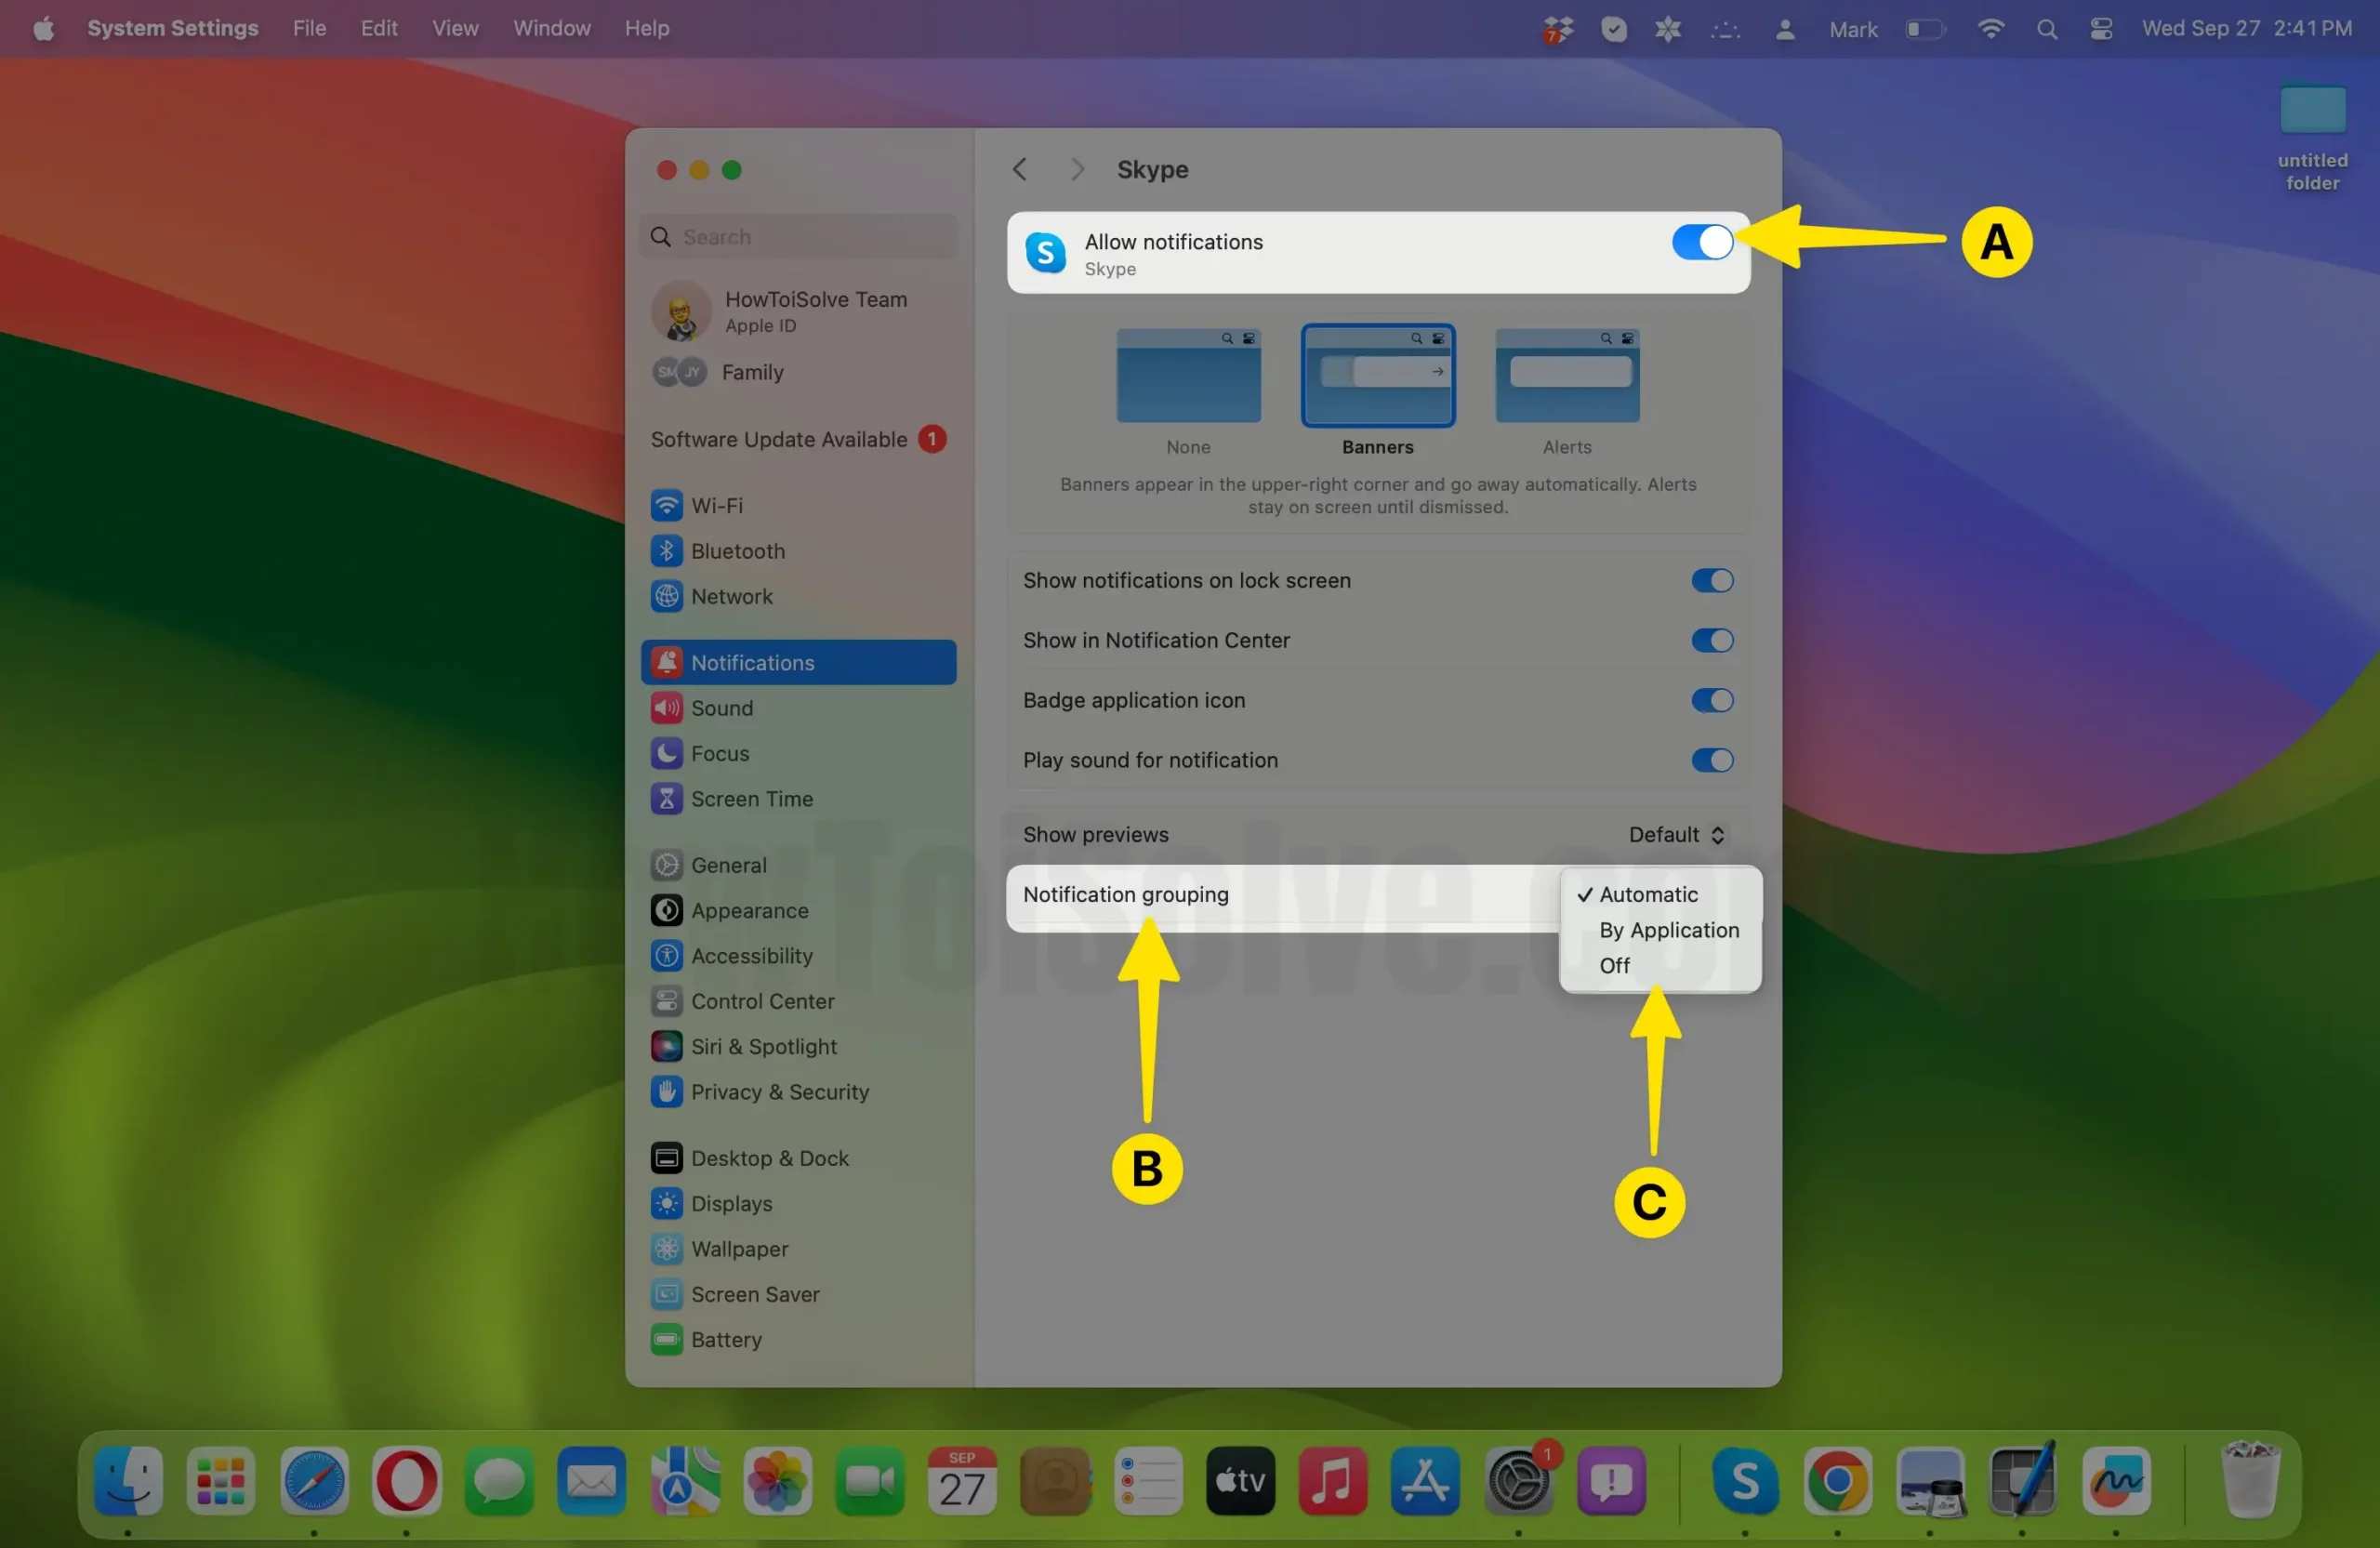 Turn ON allow notifications tap on notifications grouping choose any option Automatic, by Application, off on mac